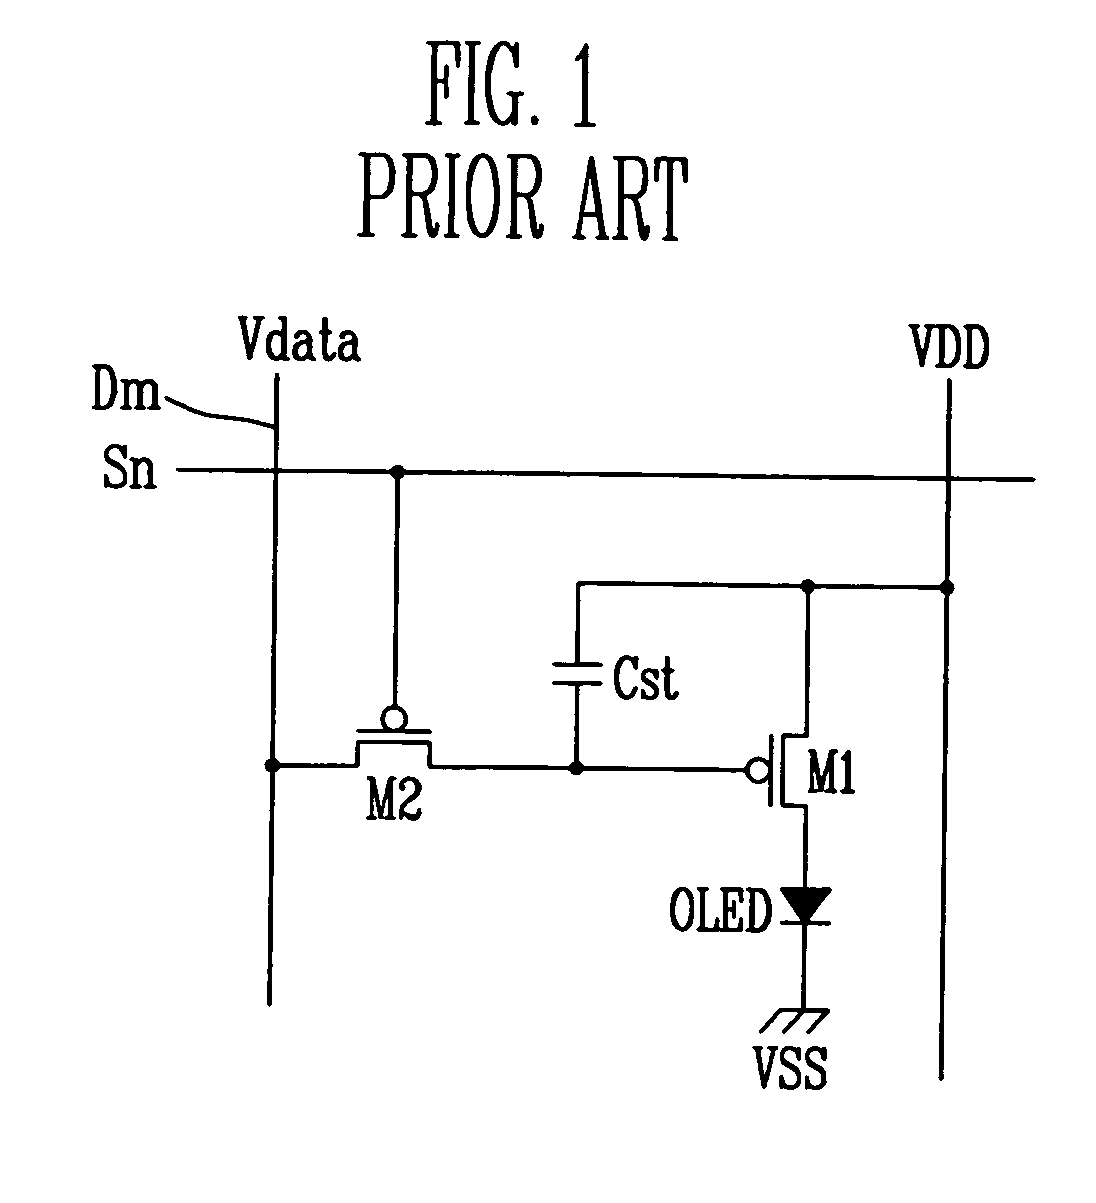 Light emitting diode display circuit with voltage drop compensation